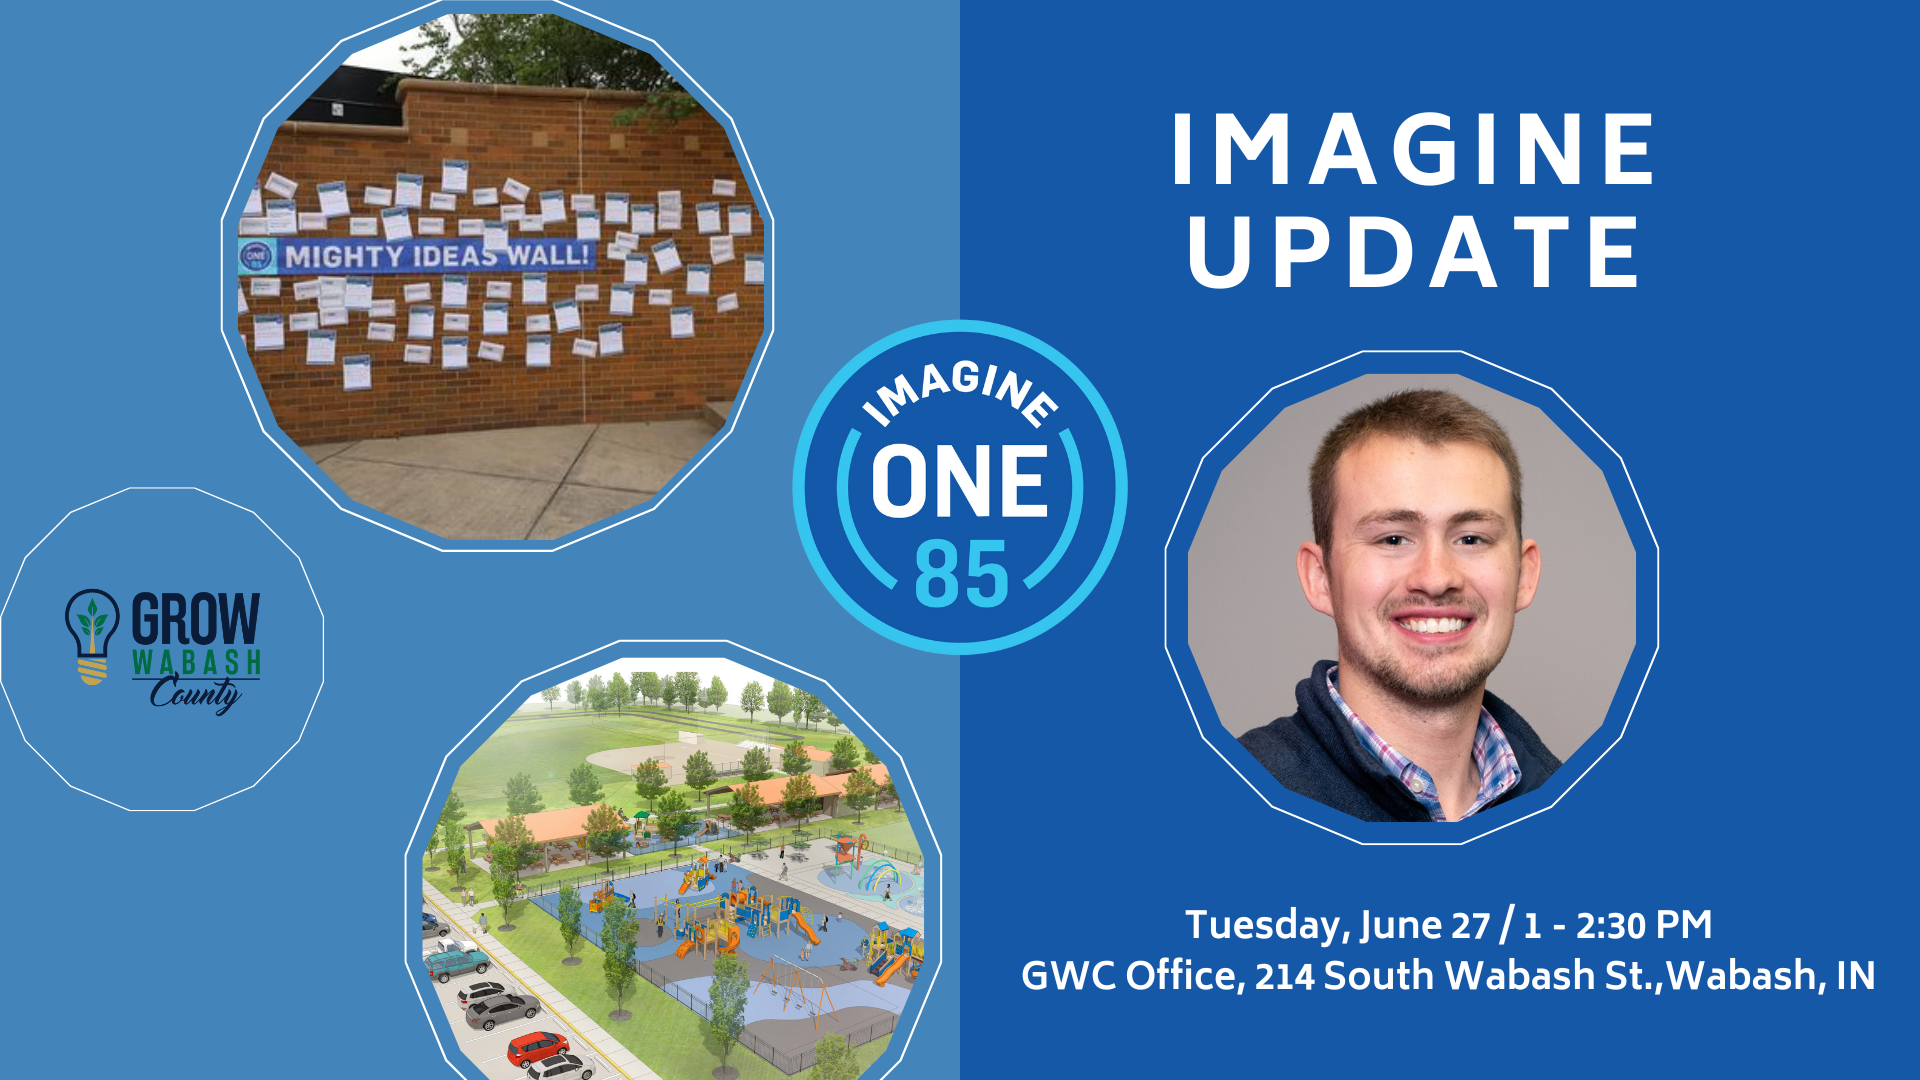 GWC to host Downard for Imagine event Photo